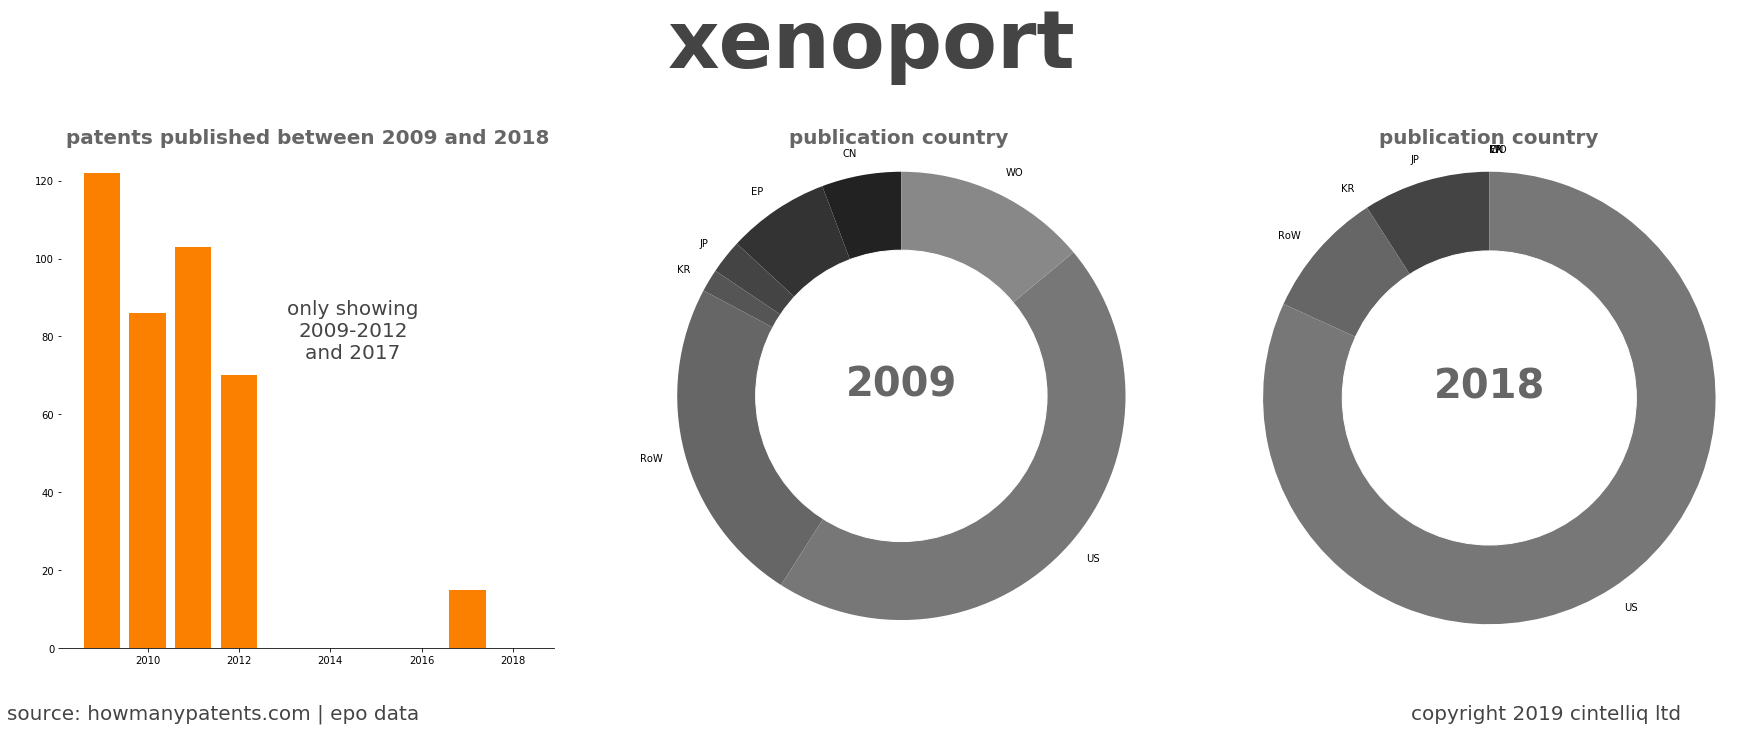 summary of patents for Xenoport